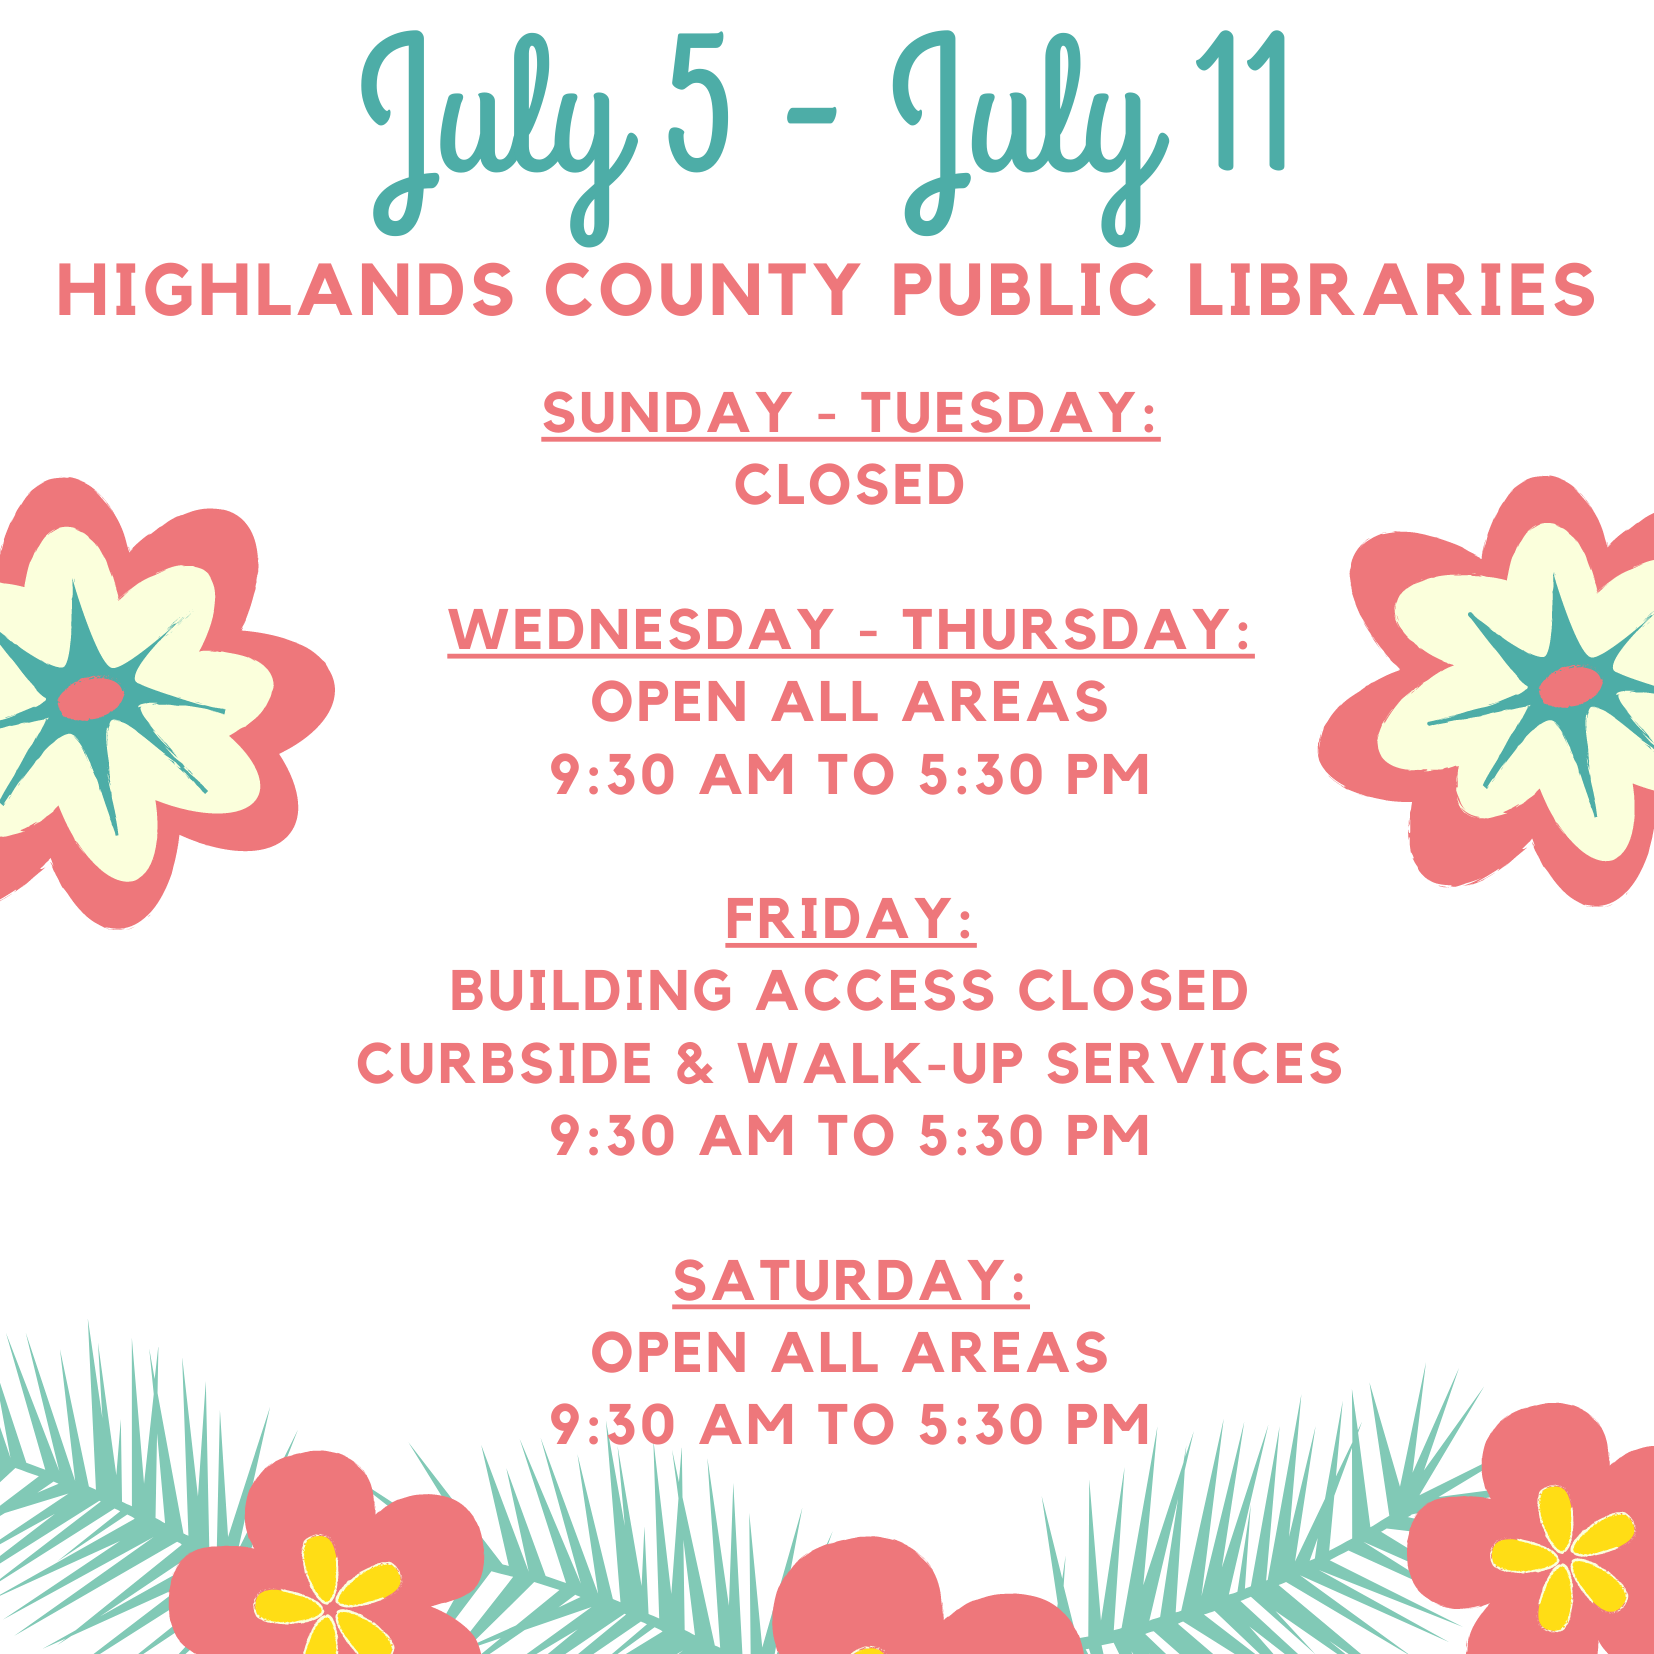 Highlands County Public Libraries Schedule: Sunday - Tuesday: Closed Wednesday & Thursday: Open all areas, 9:30 AM to 5:30 PM Friday: Building access - closed, Curbside & Walk Up Services 9:30 AM to 5:30 PM Saturday: Open all areas, 9:30 AM to 5:30 PM 